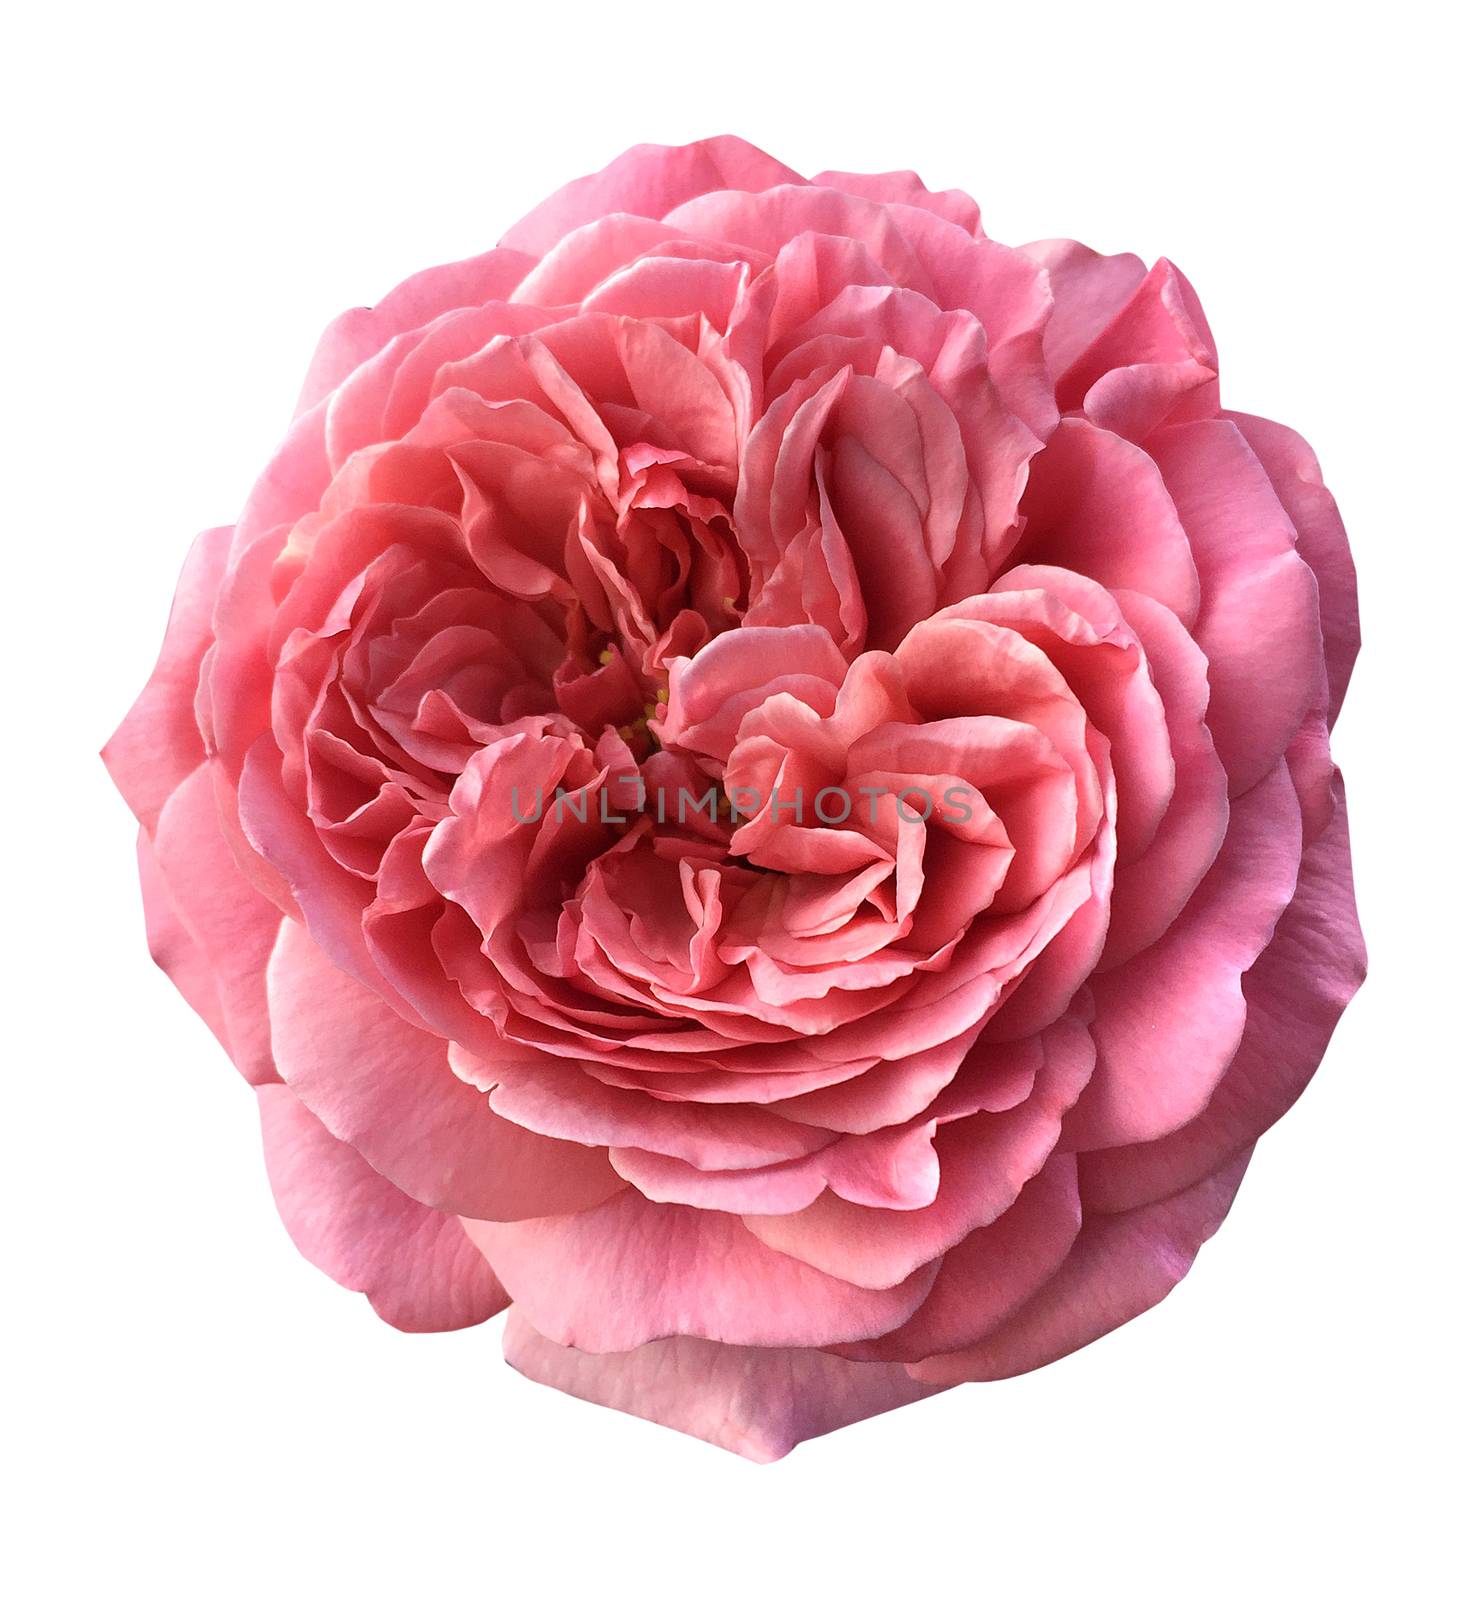 Beautiful English roses on white background,with clipping path by ohhlanla